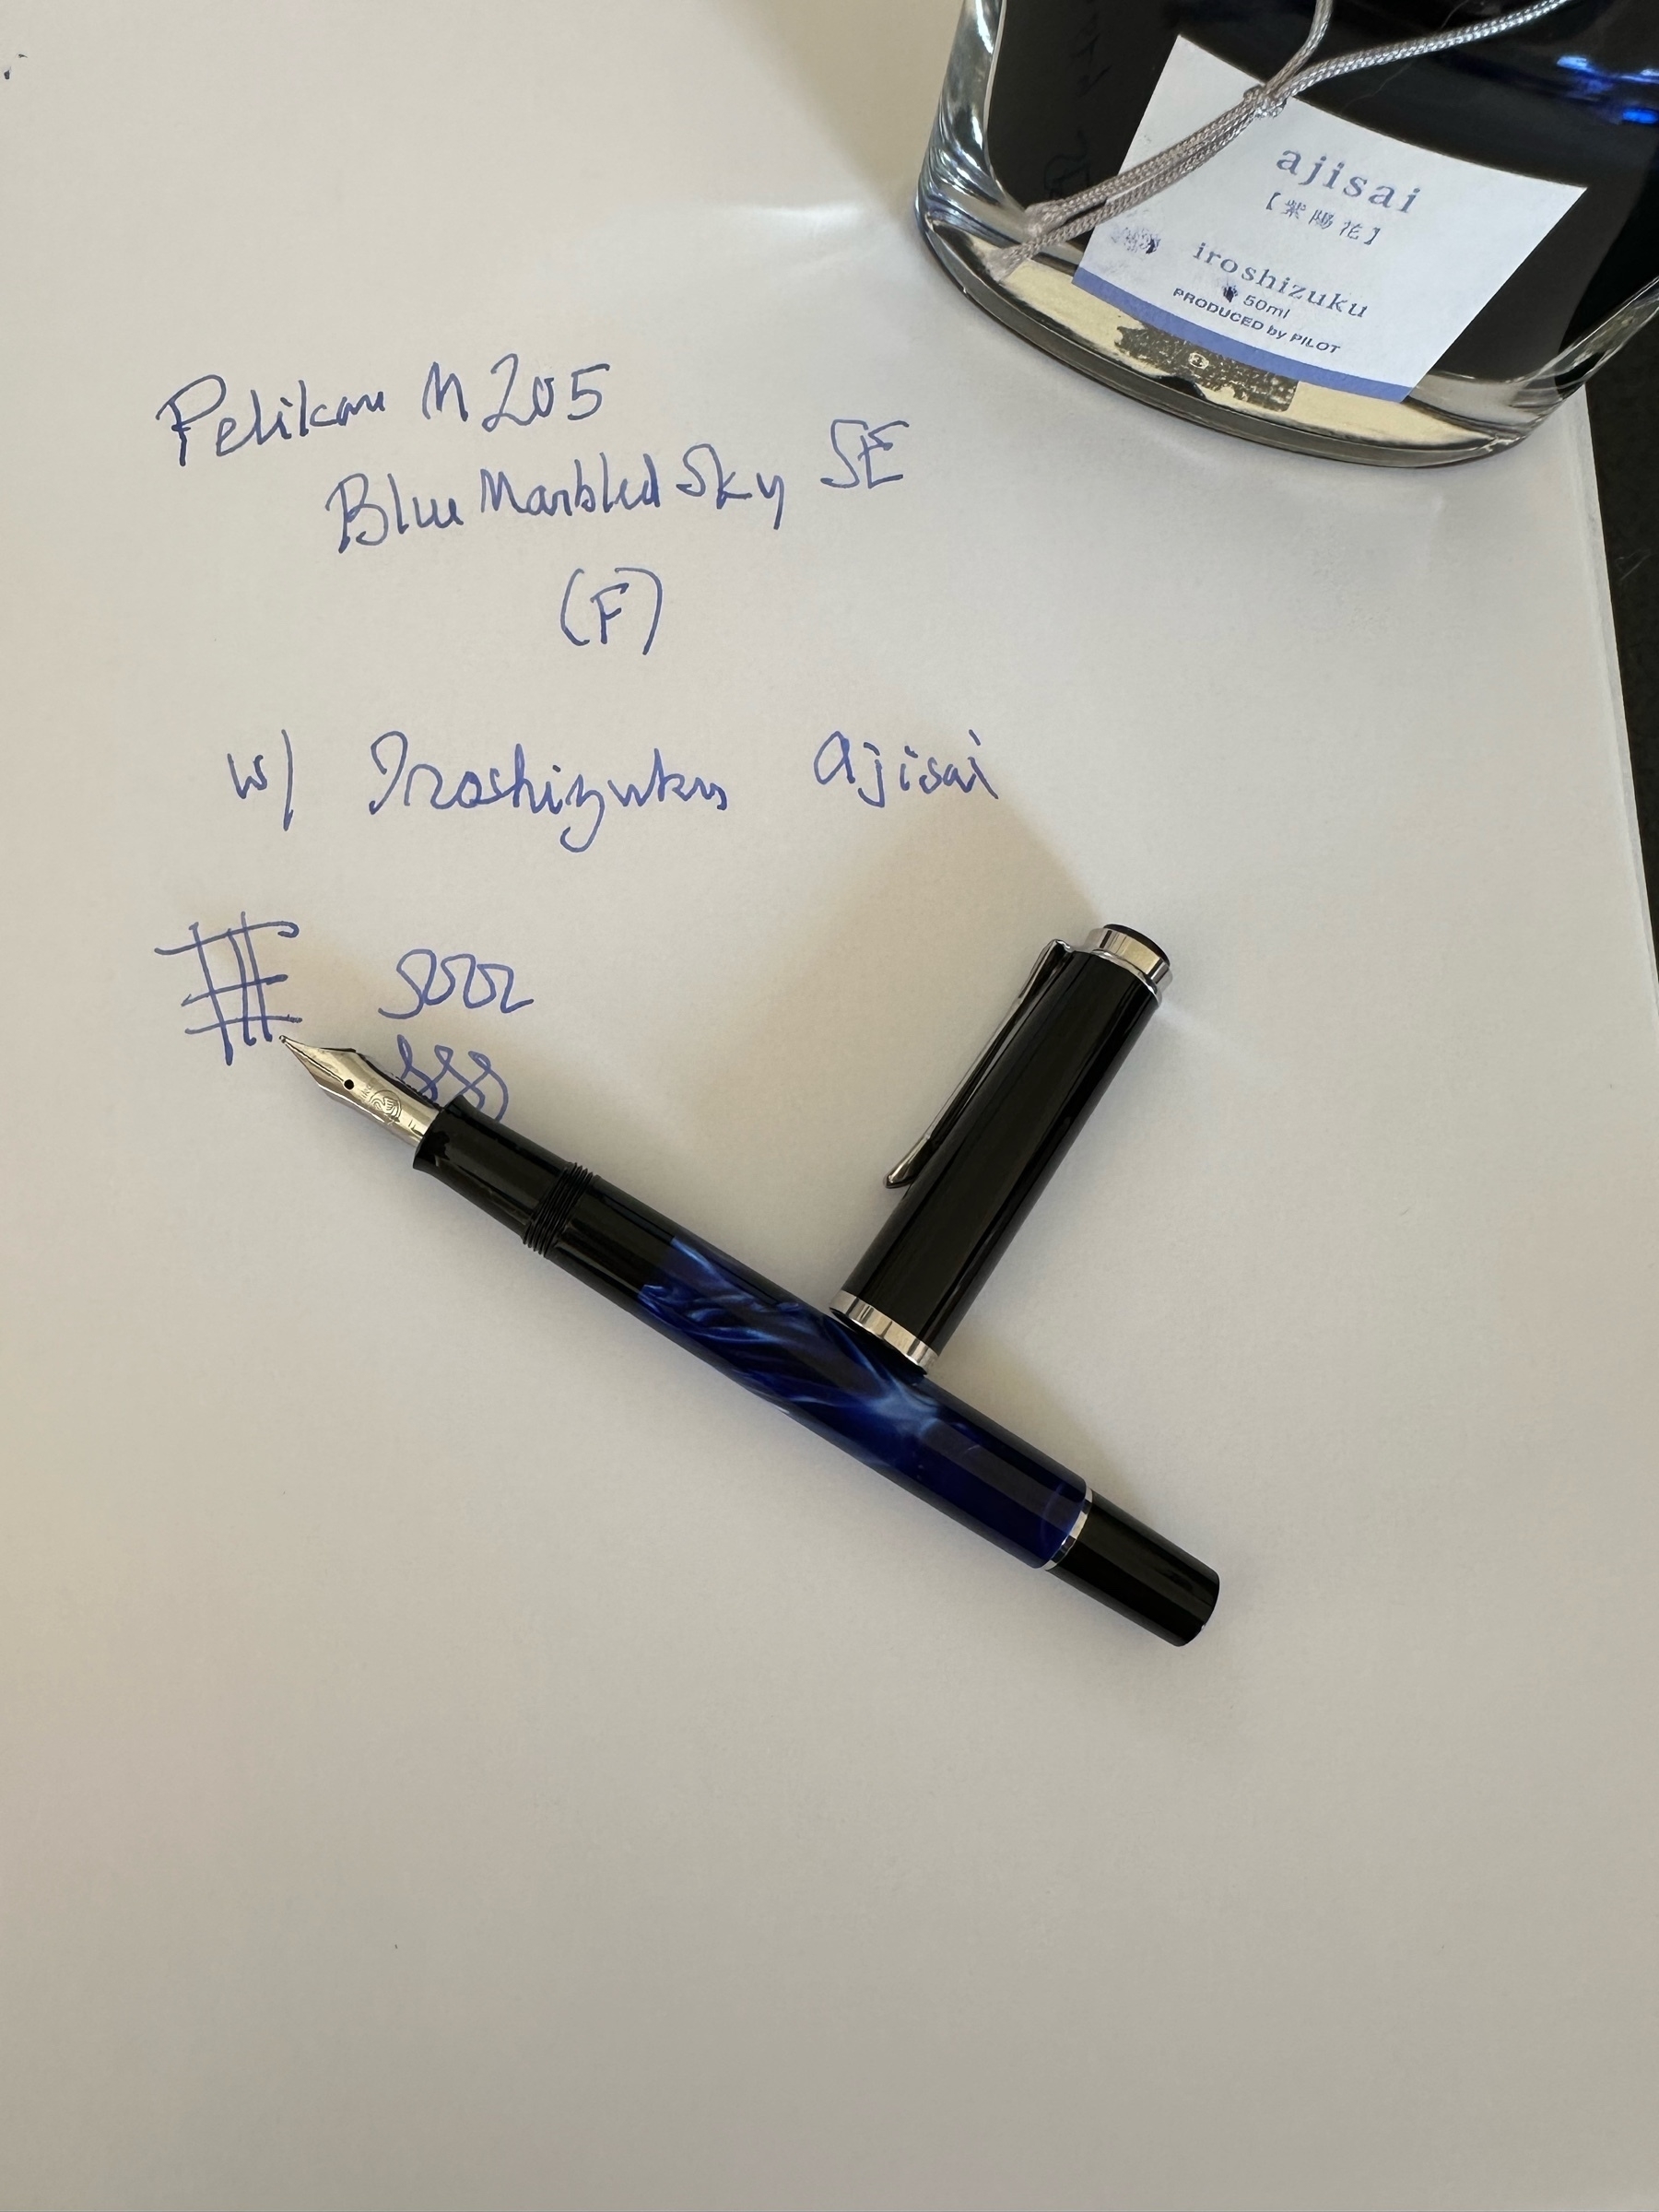 Fountain pen and ink bottle.